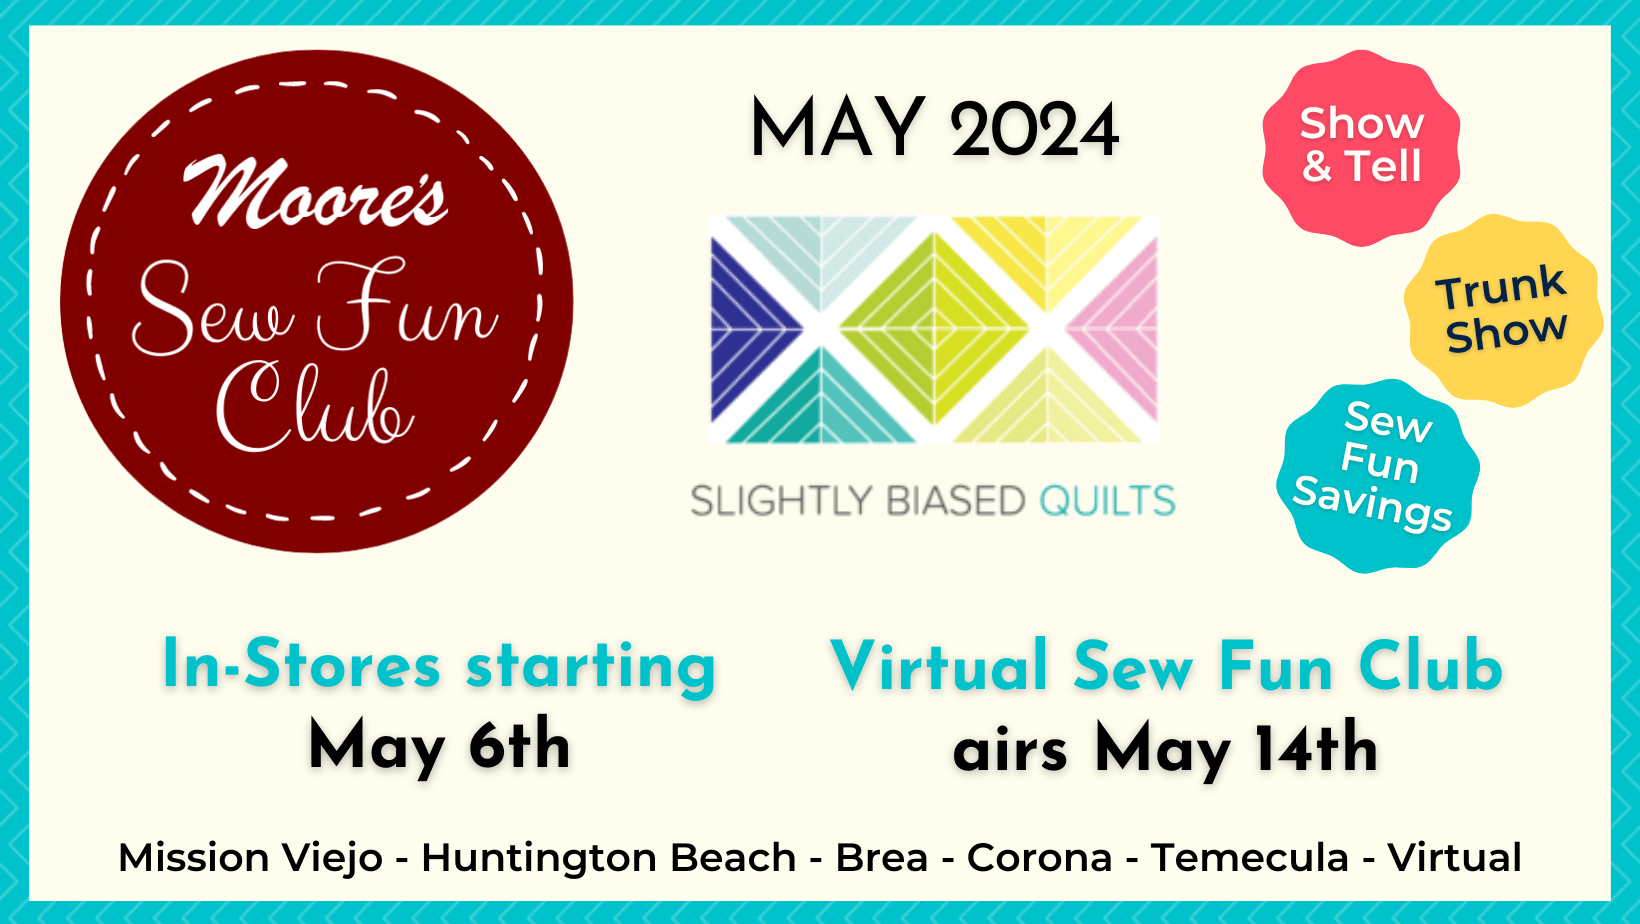 April Sew Fun Club info card featuring Slightly Biased Quilts